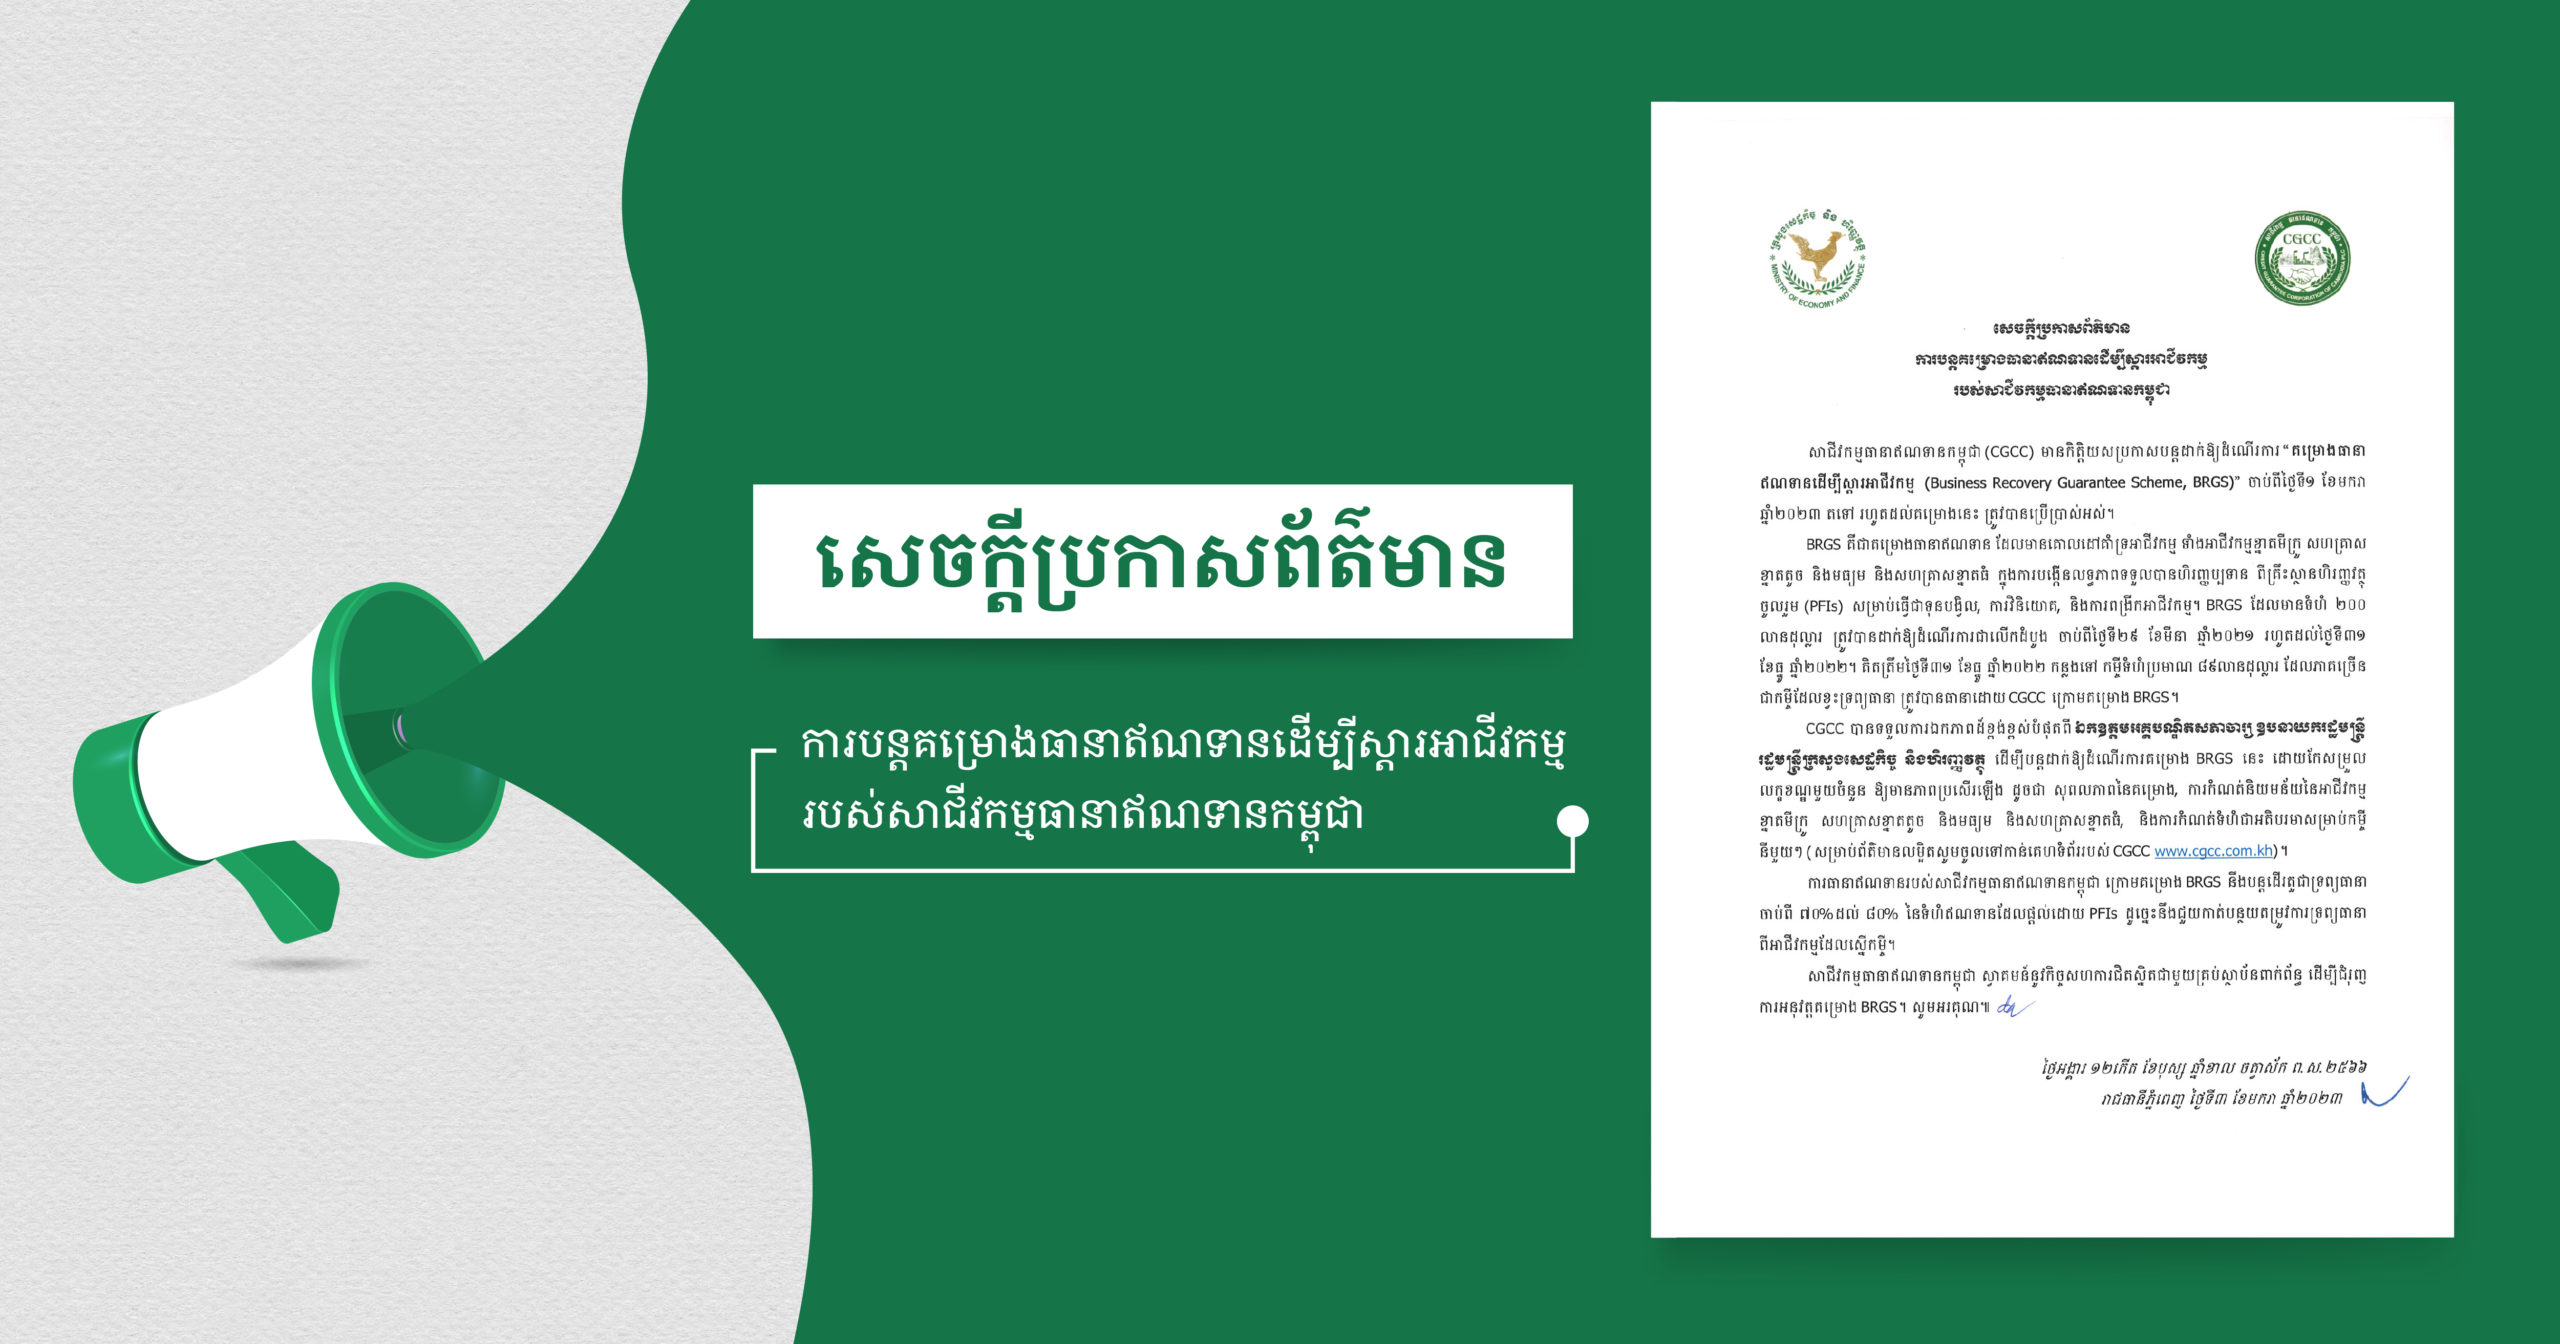 Press Release - The Extension of the Business Recovery Guarantee Scheme of Credit Guarantee Corporation of Cambodia